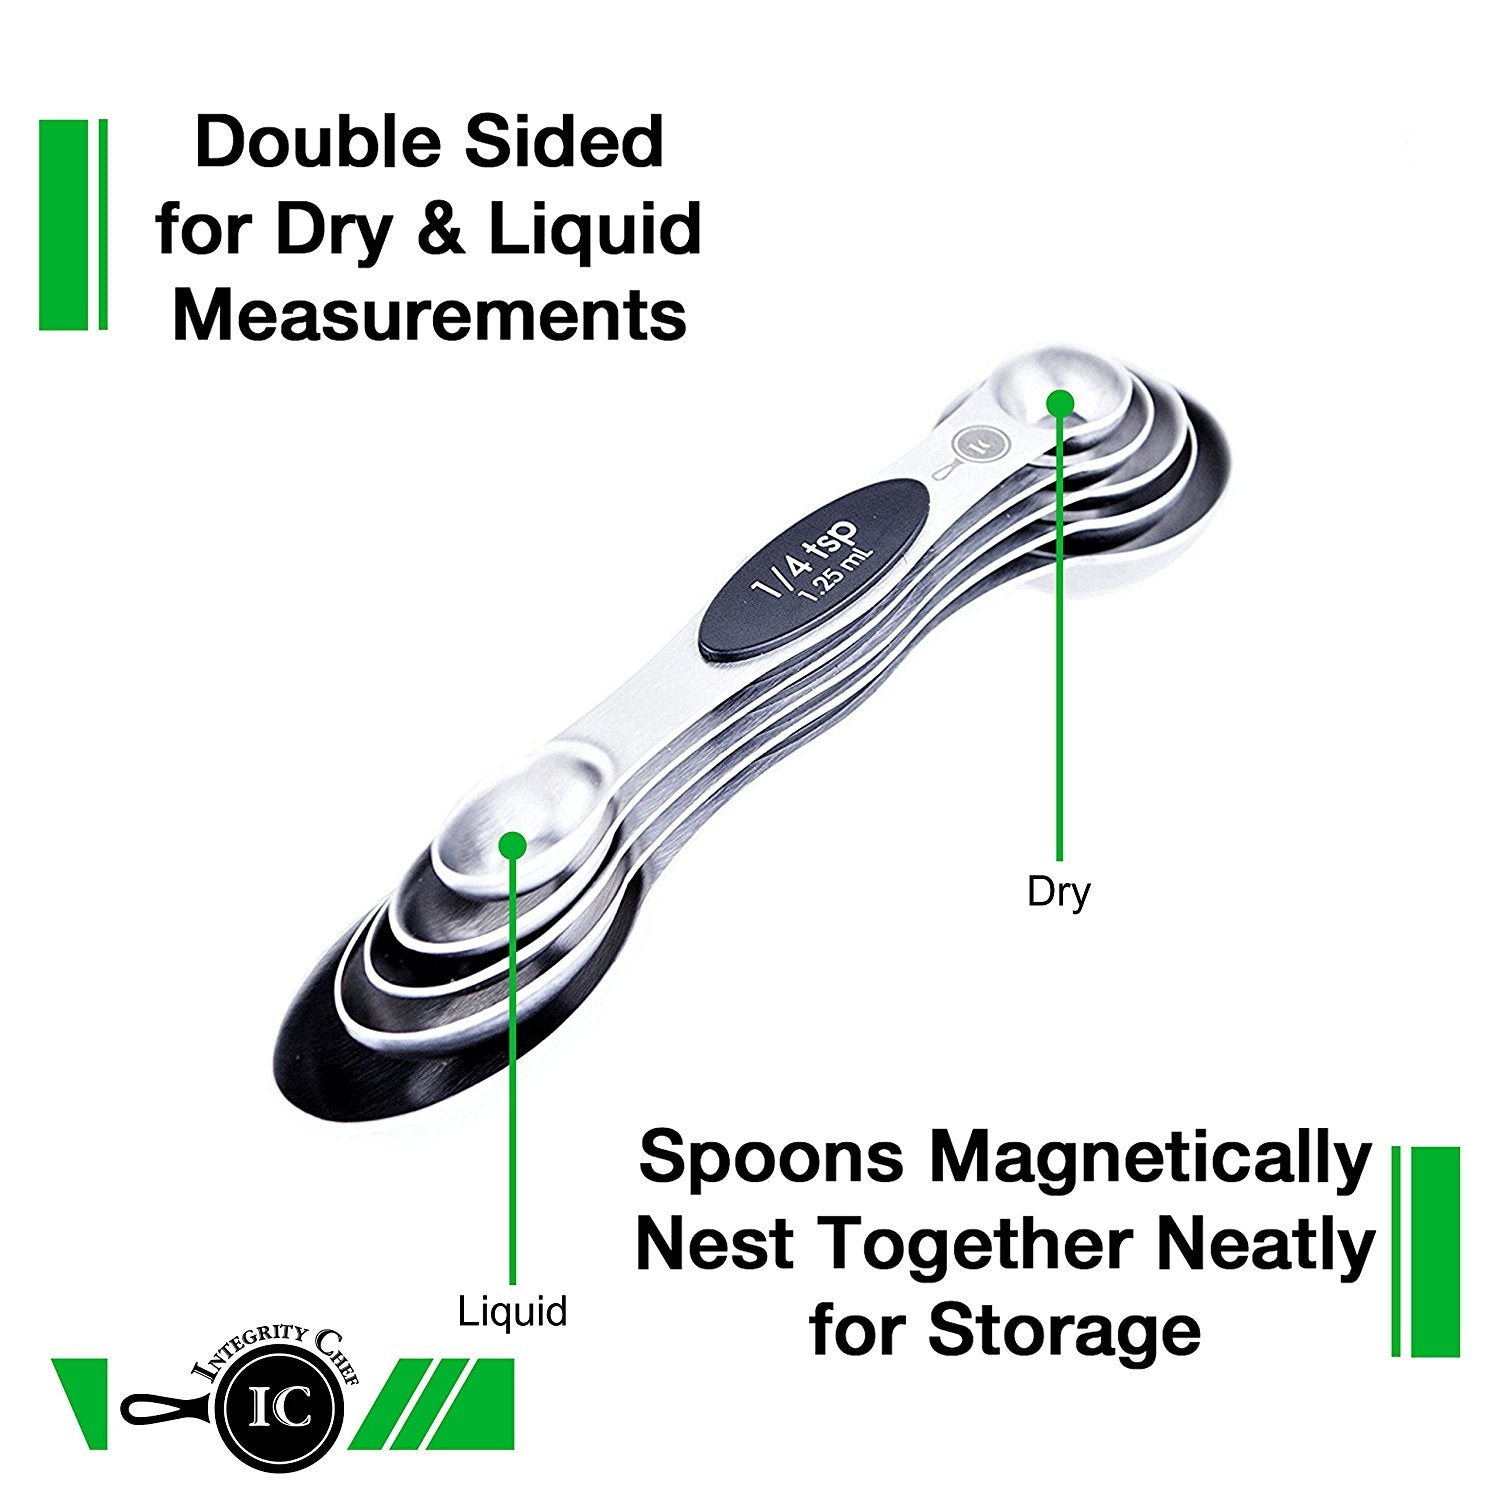 Premium Stackable Magnetic Measuring Spoon Set by Integrity Chef - Baker's Dream Gift, Stainless Steel 5-Piece Kit, Magnetic Snaps, Measure Dry & Liquid Ingredients, SAVE A LIFE!